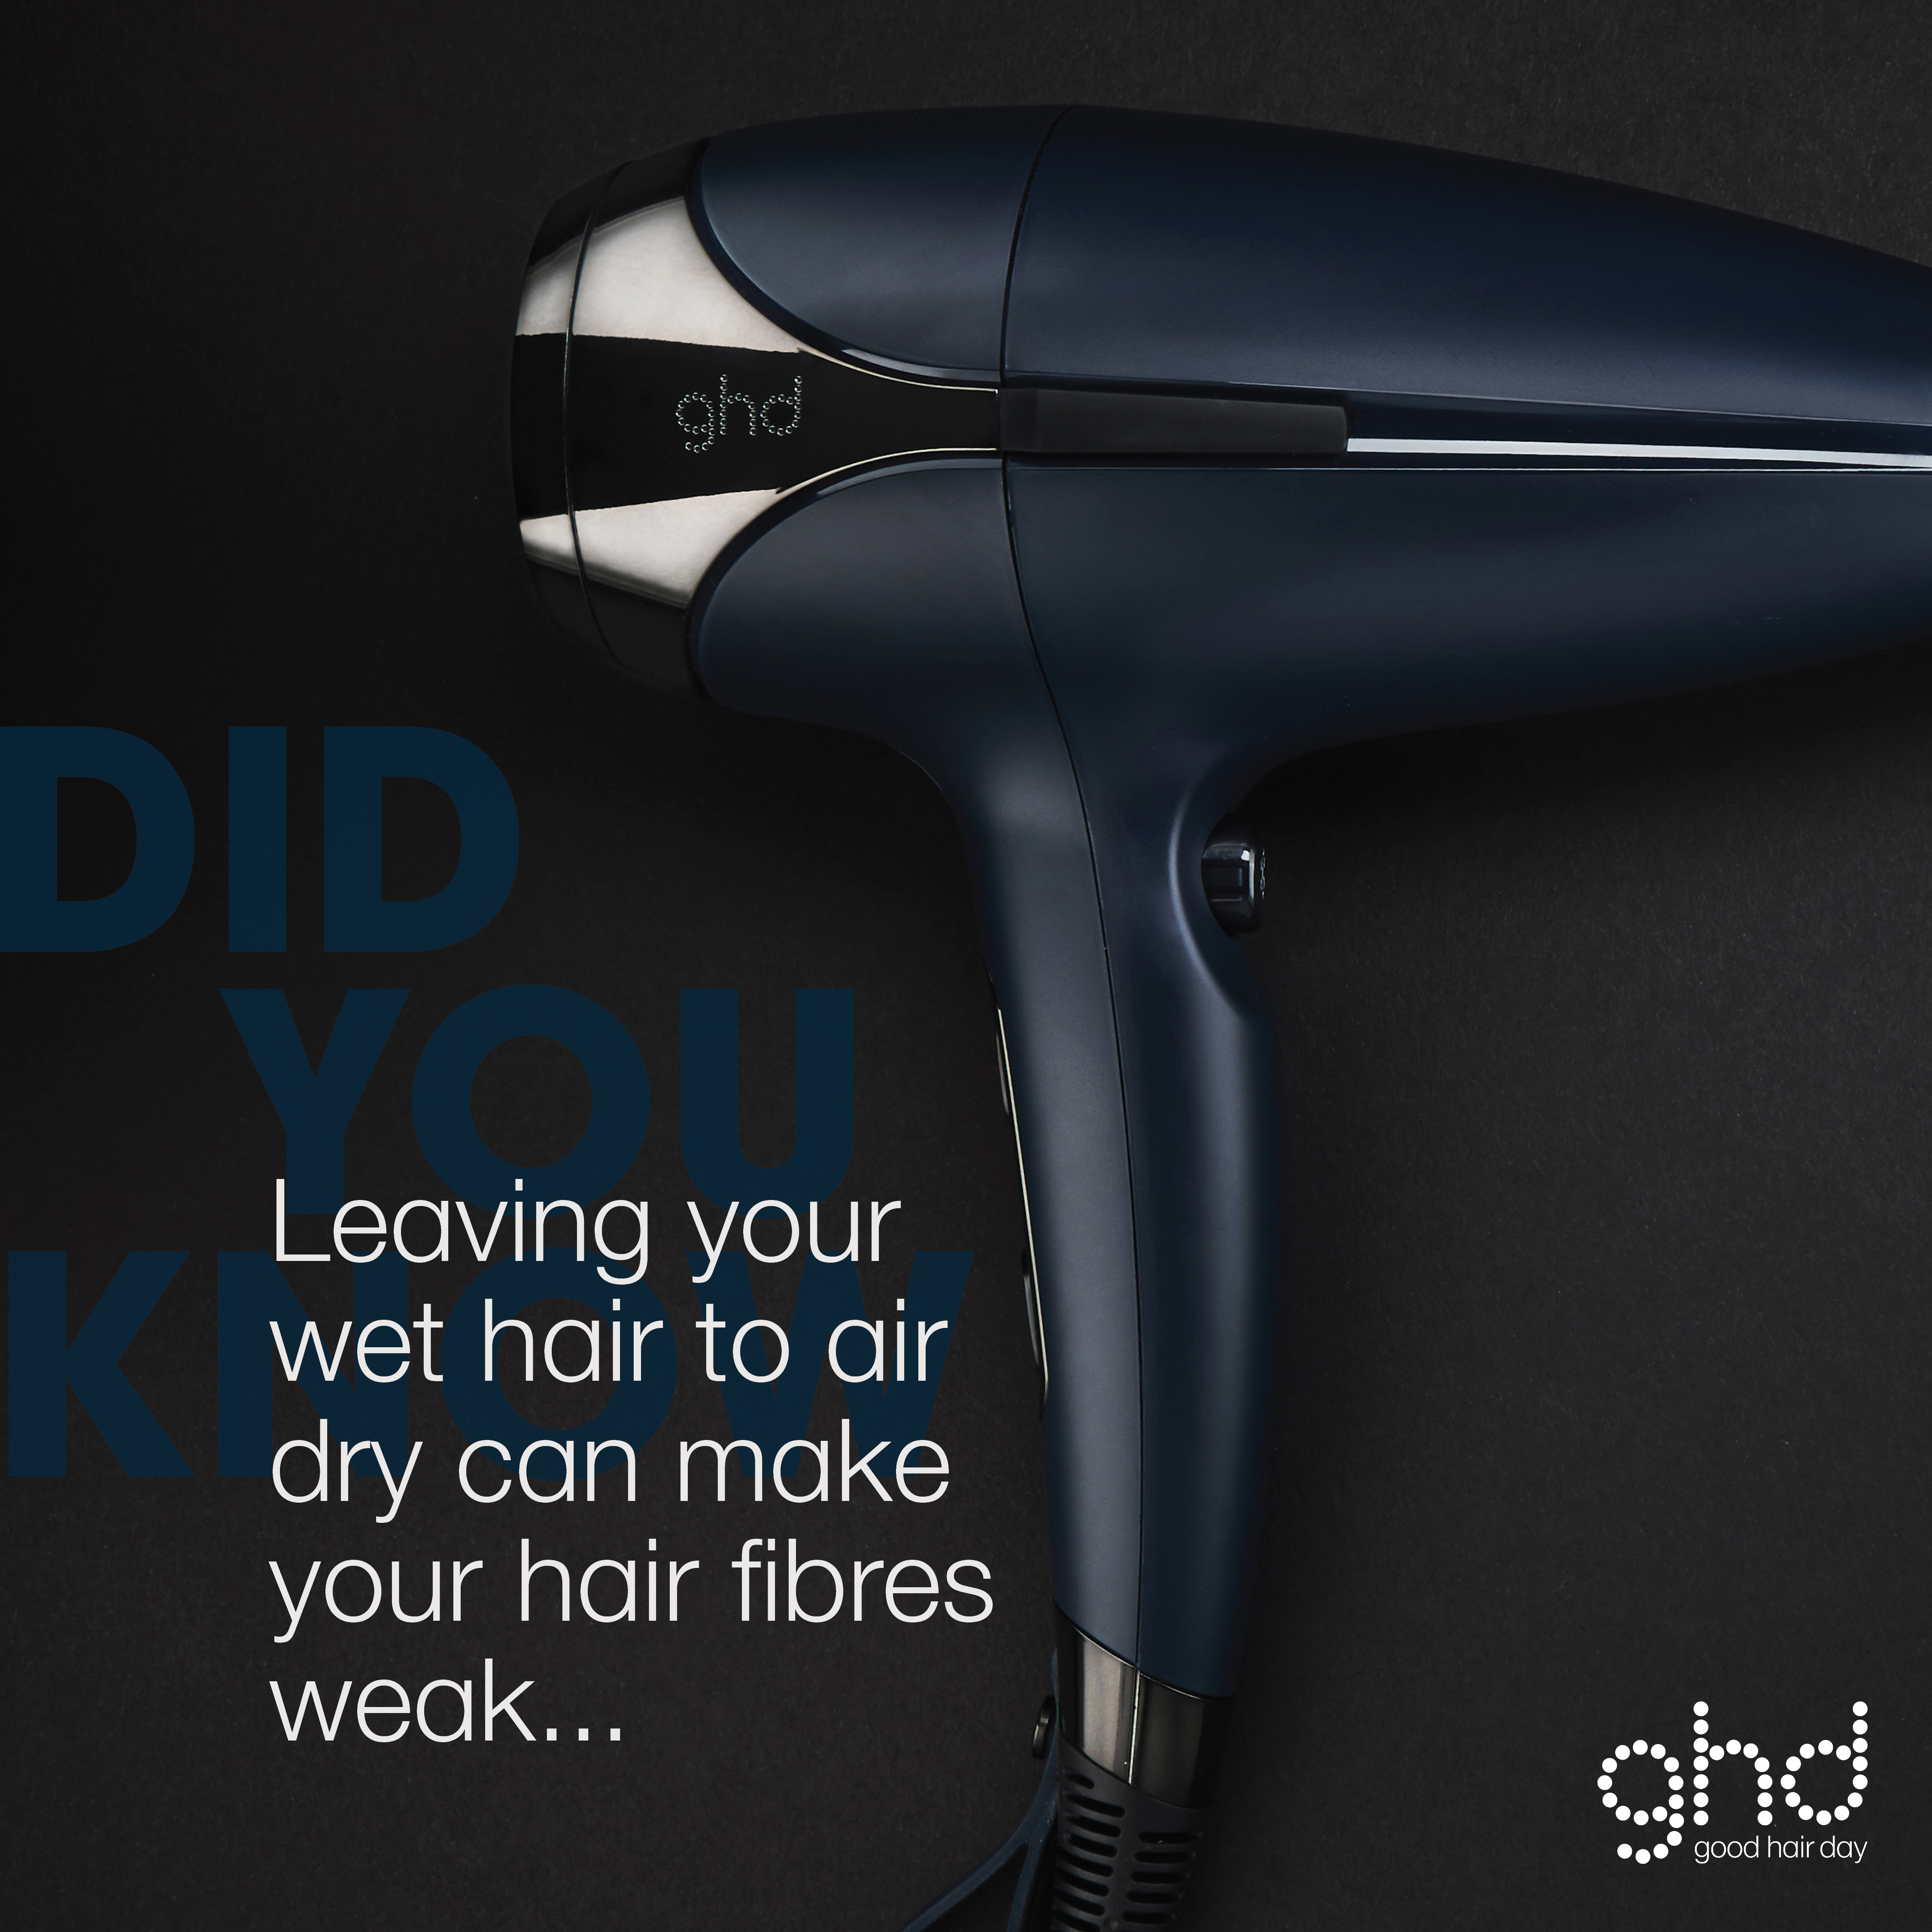 A Review Of The Newly-Launched GHD Helios Hair Dryer